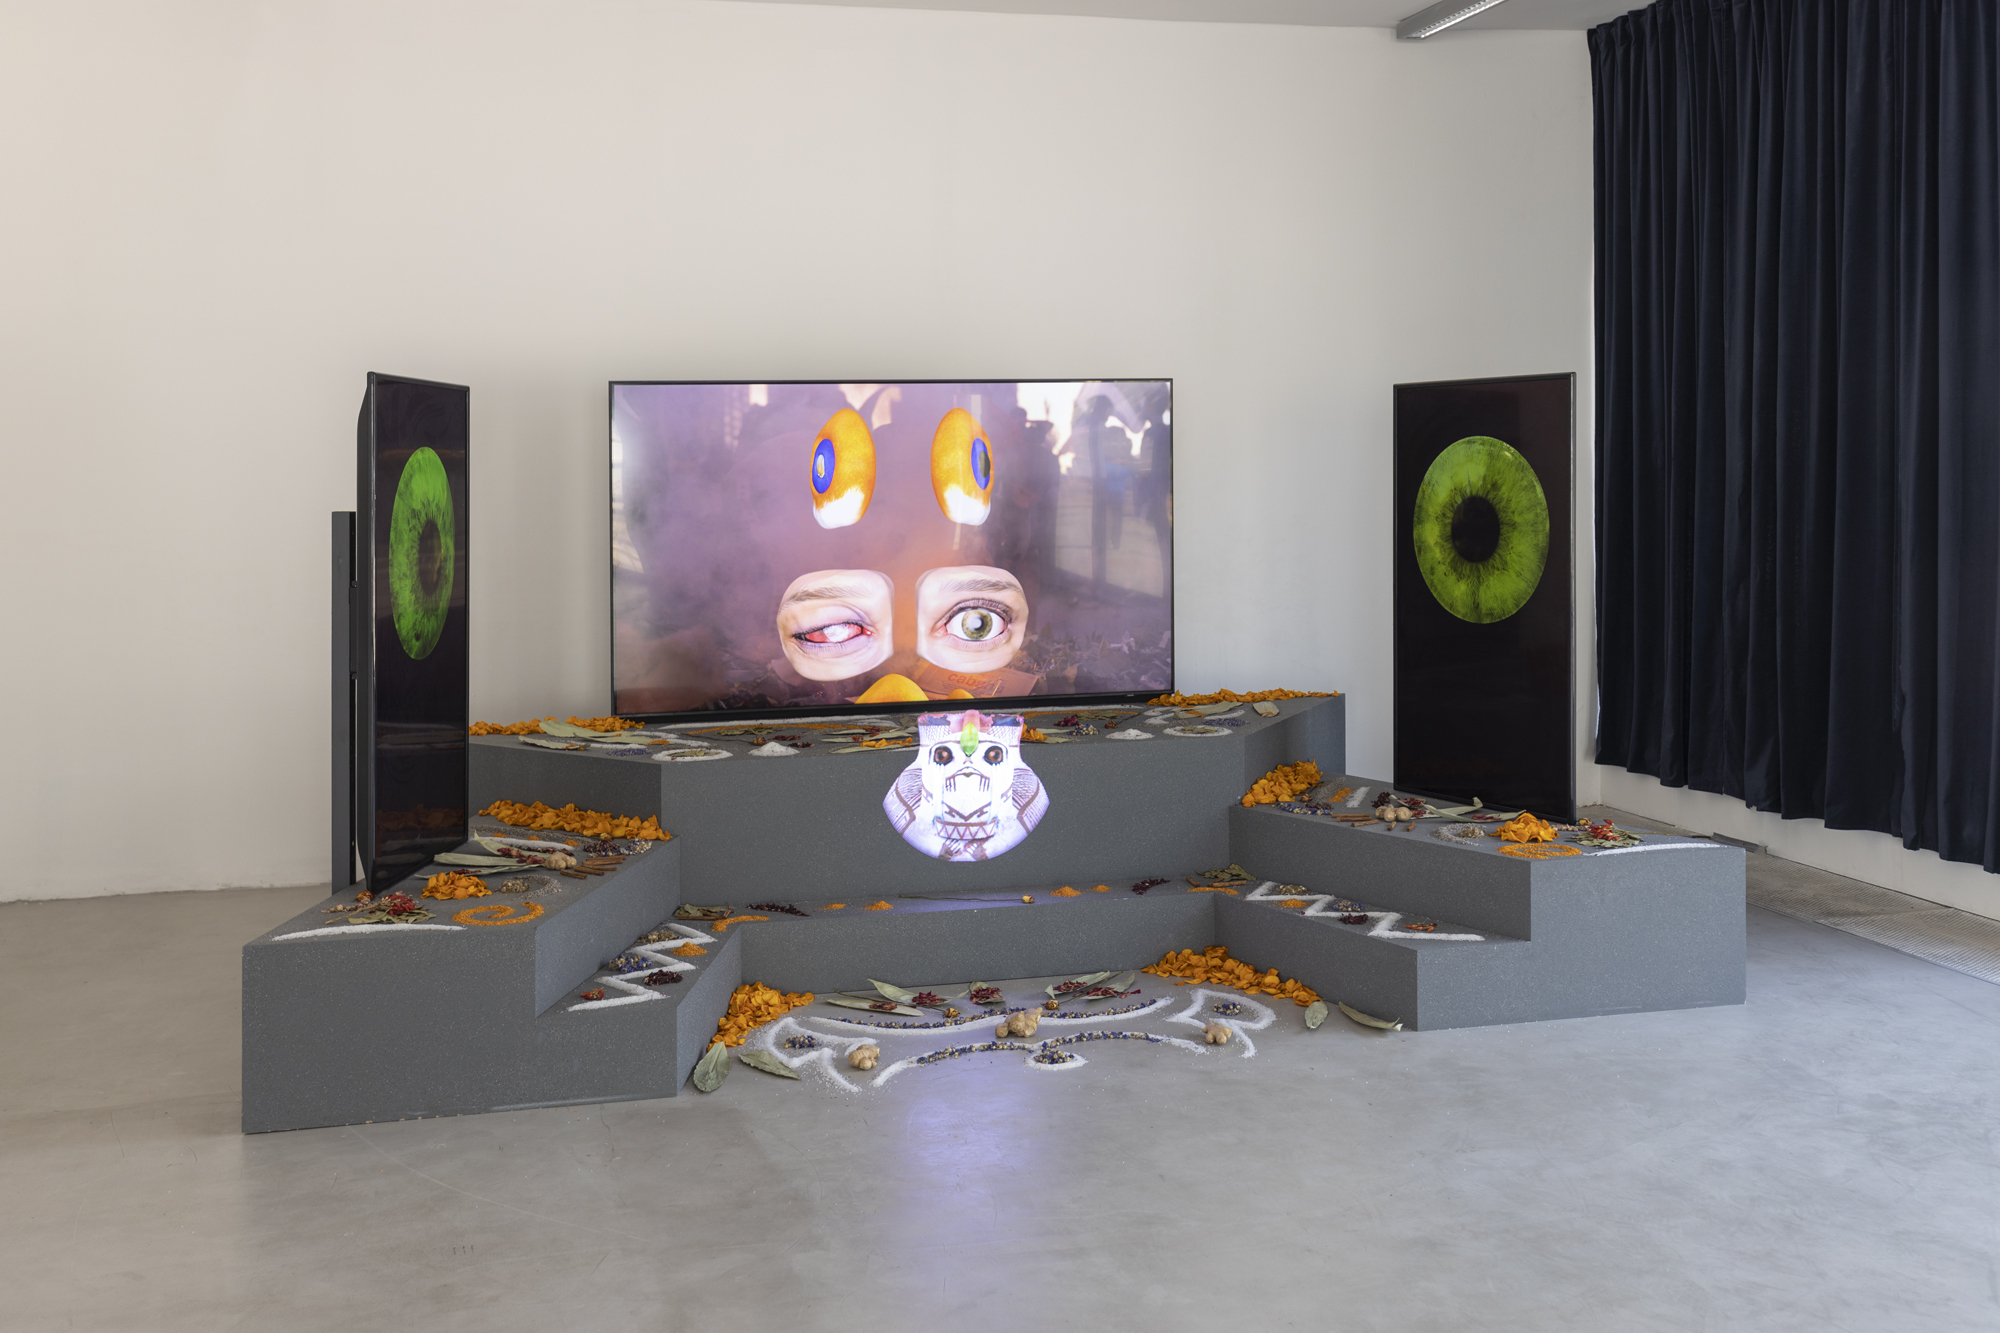 Patricia DomÃ­nguez Green Irises, 2019-2020 Madre Drone, 2019-2020â€¨(Commissioned and produced by Gasworks, with support from Lazo Cordillera, FundaciÃ³n Engel, FundaciÃ³n AMA, and SCAN.) 